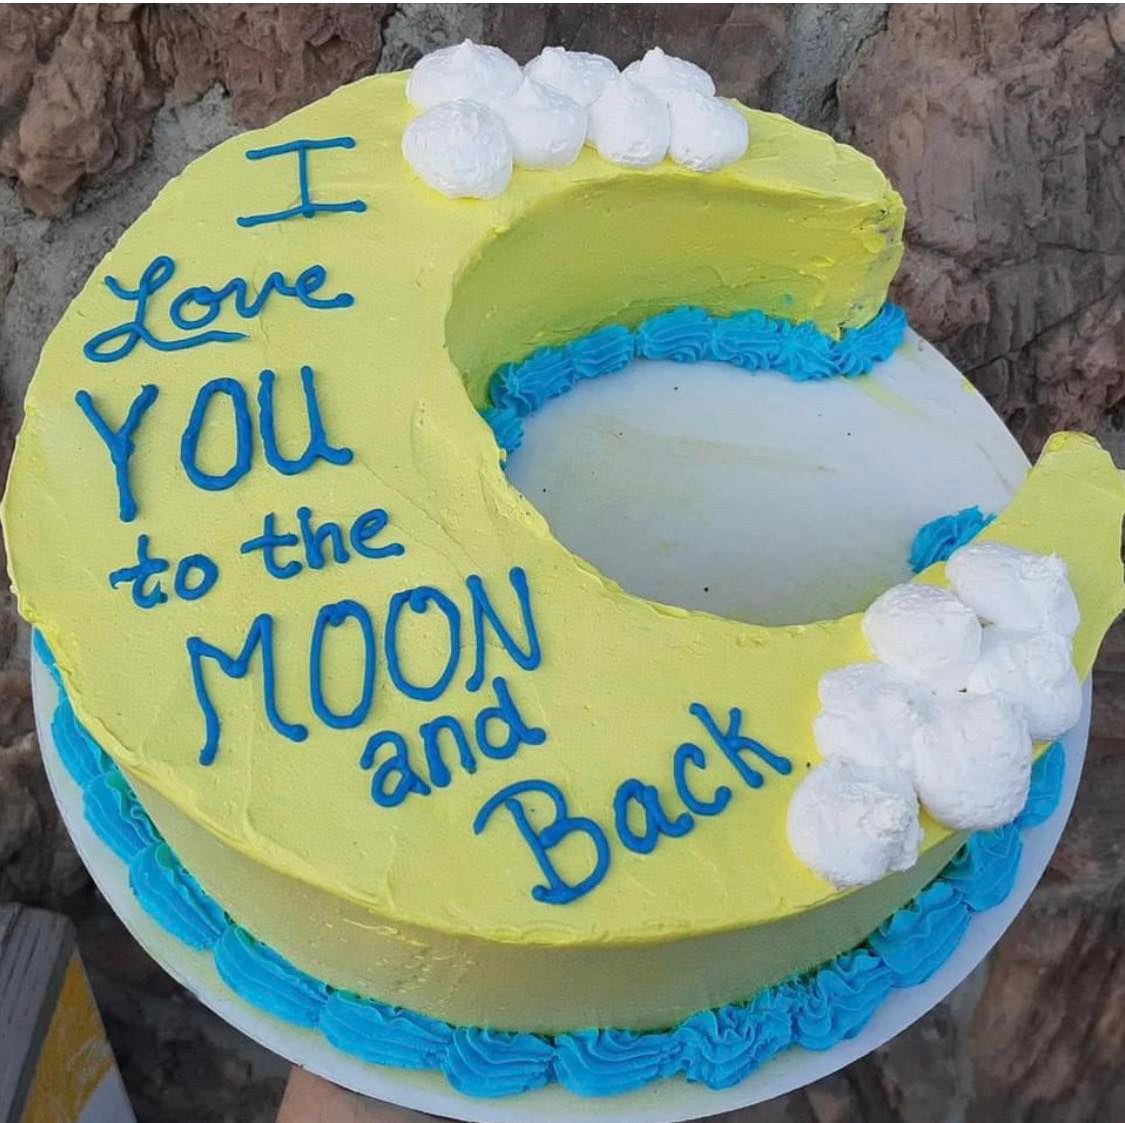 Love You To The Moon And Back Cake by Joe's Dairy Bar